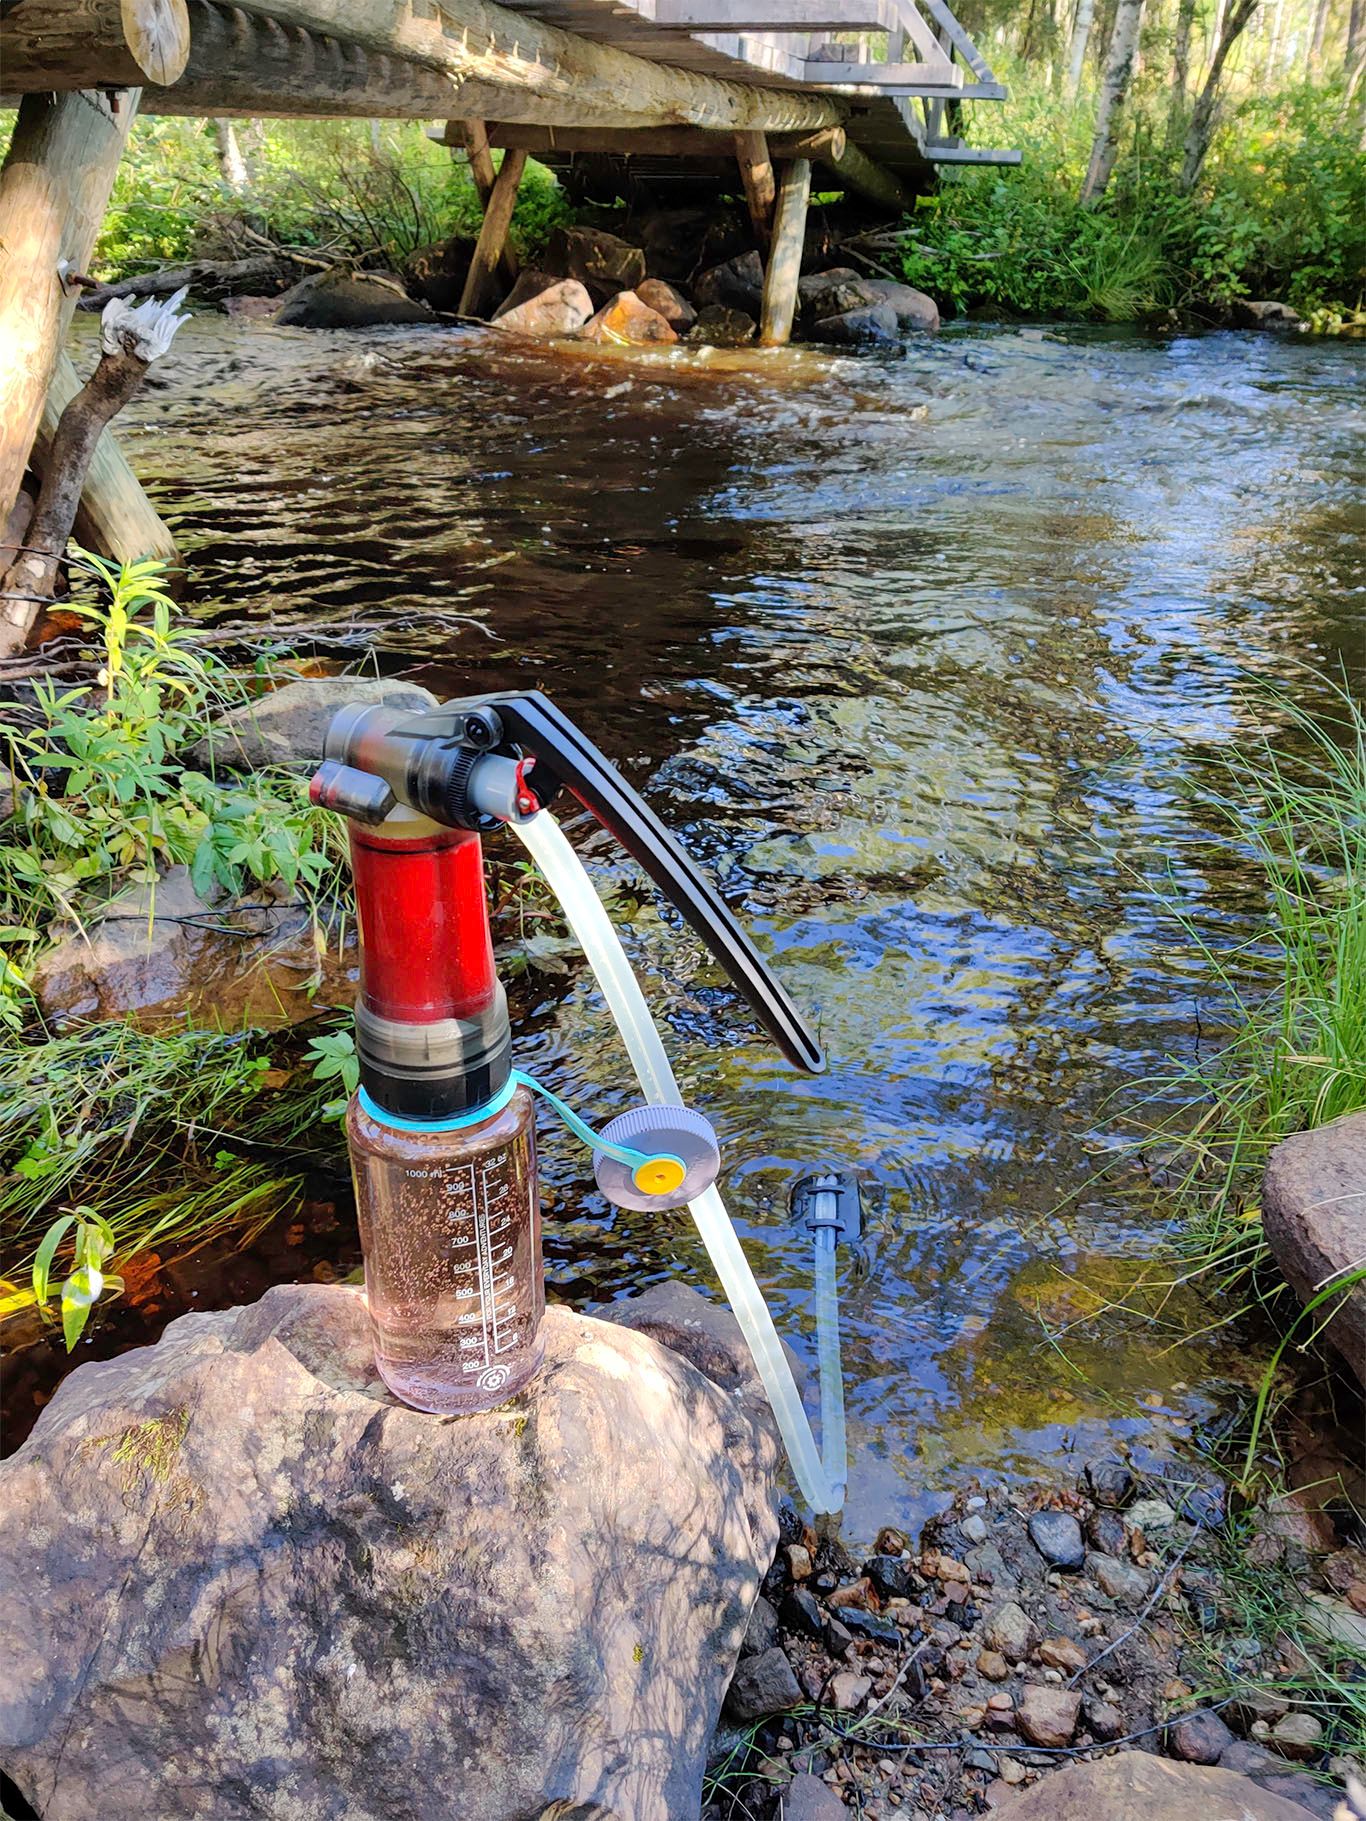 A water purifier extended into the river to pump water to a drinking bottle.